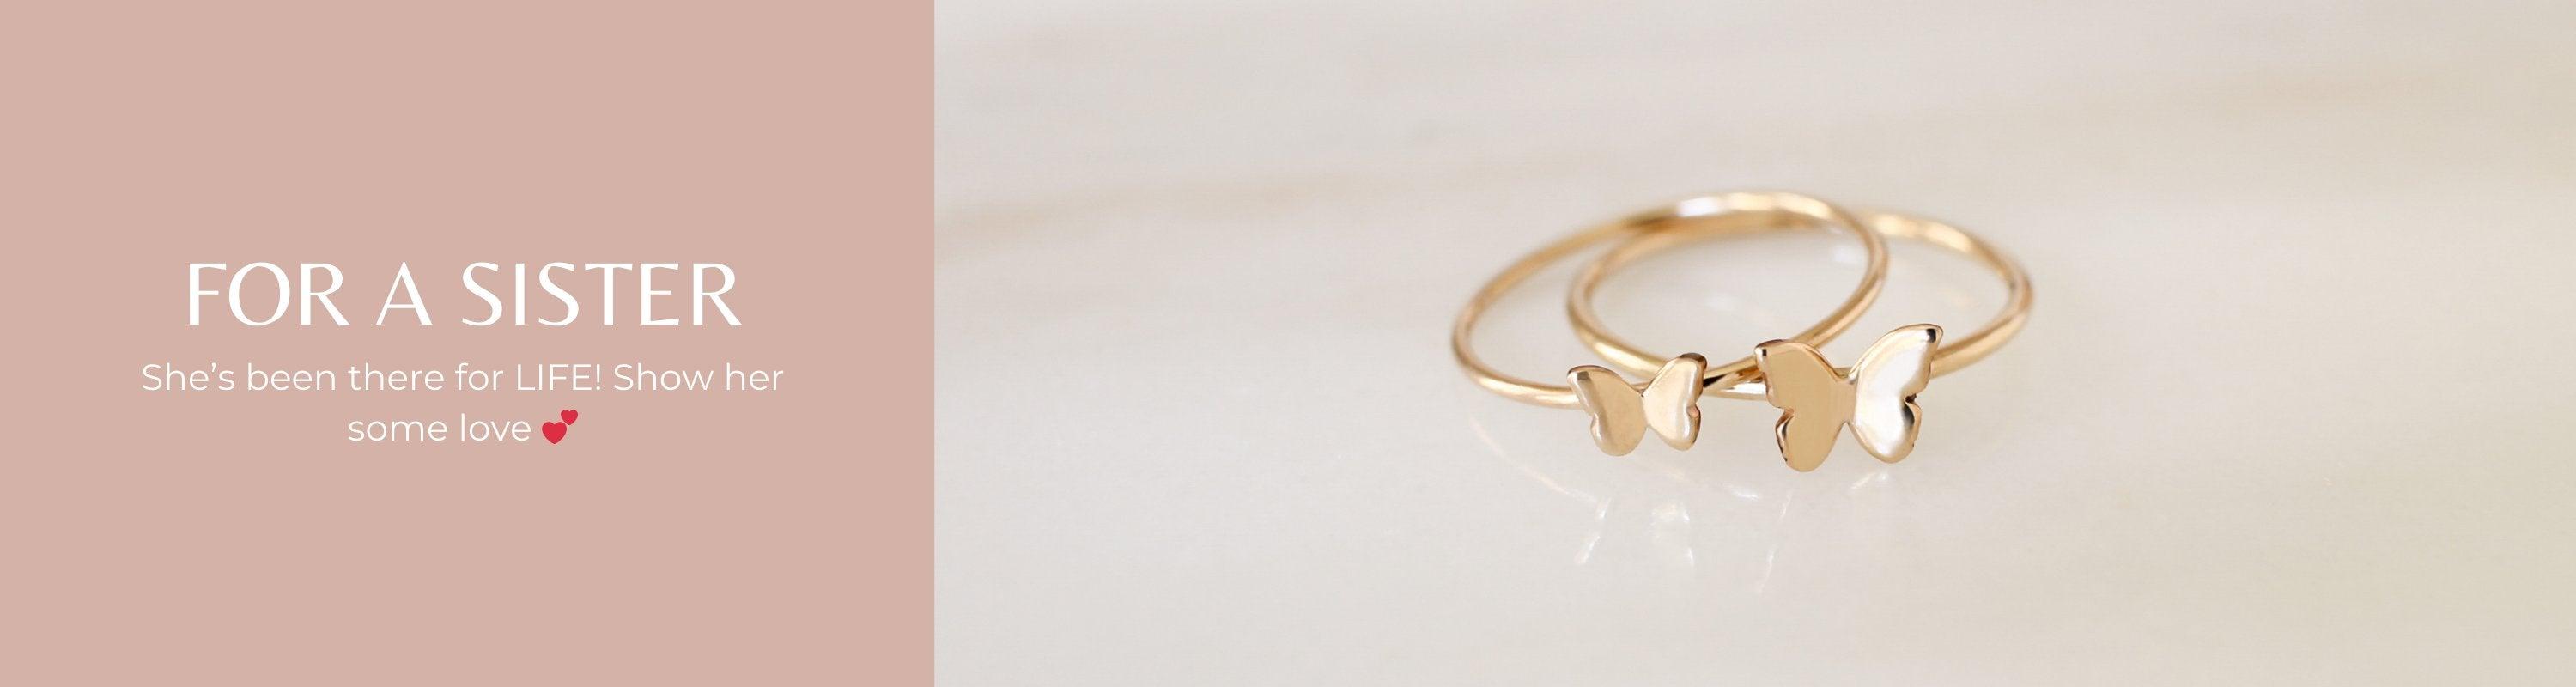 For a Sister - Nolia Jewelry - Meaningful + Sustainably Handcrafted Jewelry